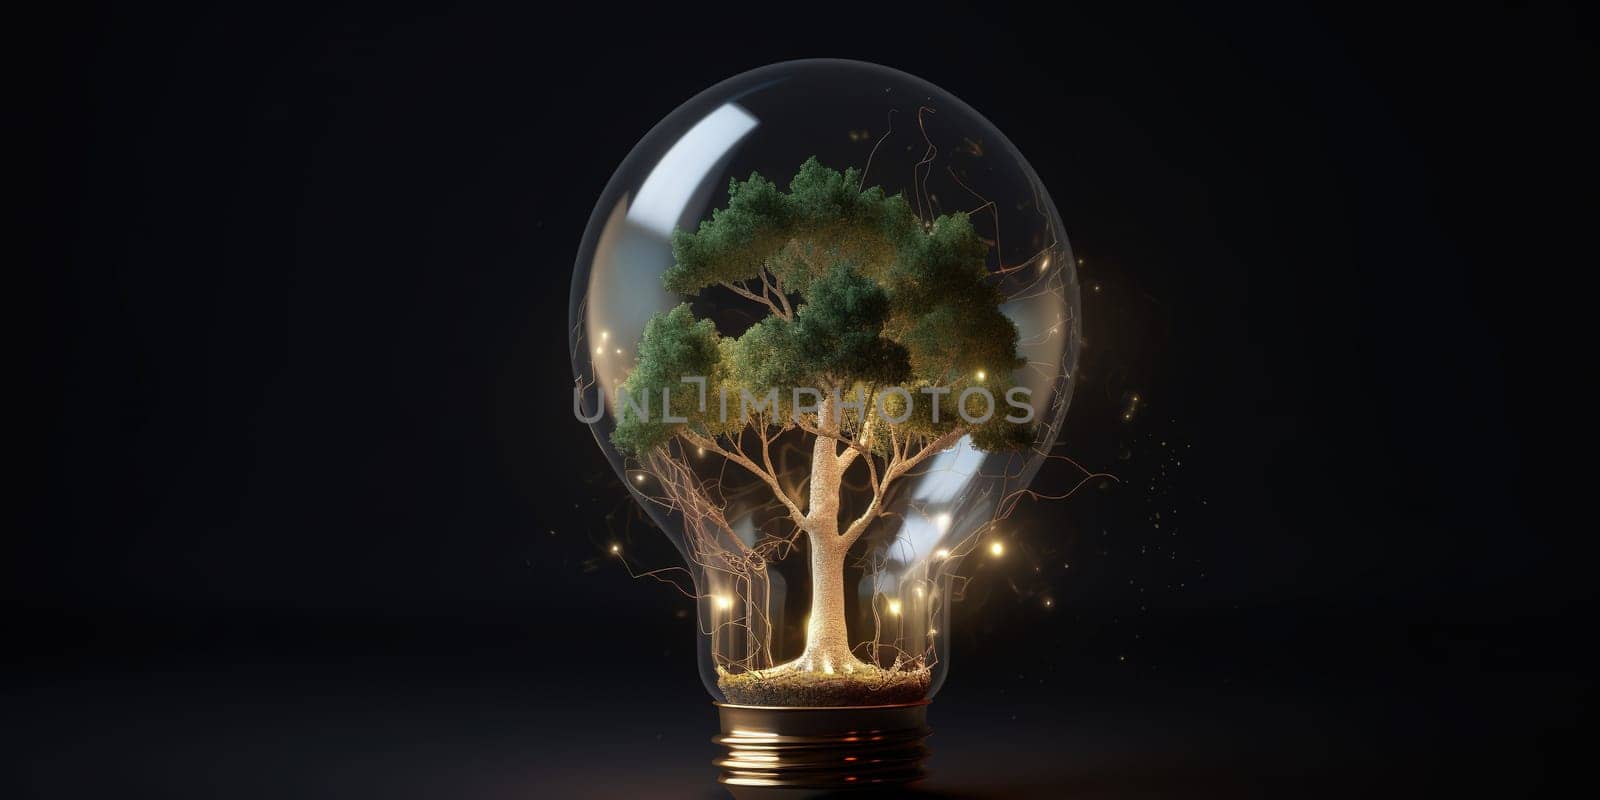 Electric Bulb With Growing Green Tree Inside On Black Background, Concept Of Ecological Problems In Our Life by GekaSkr